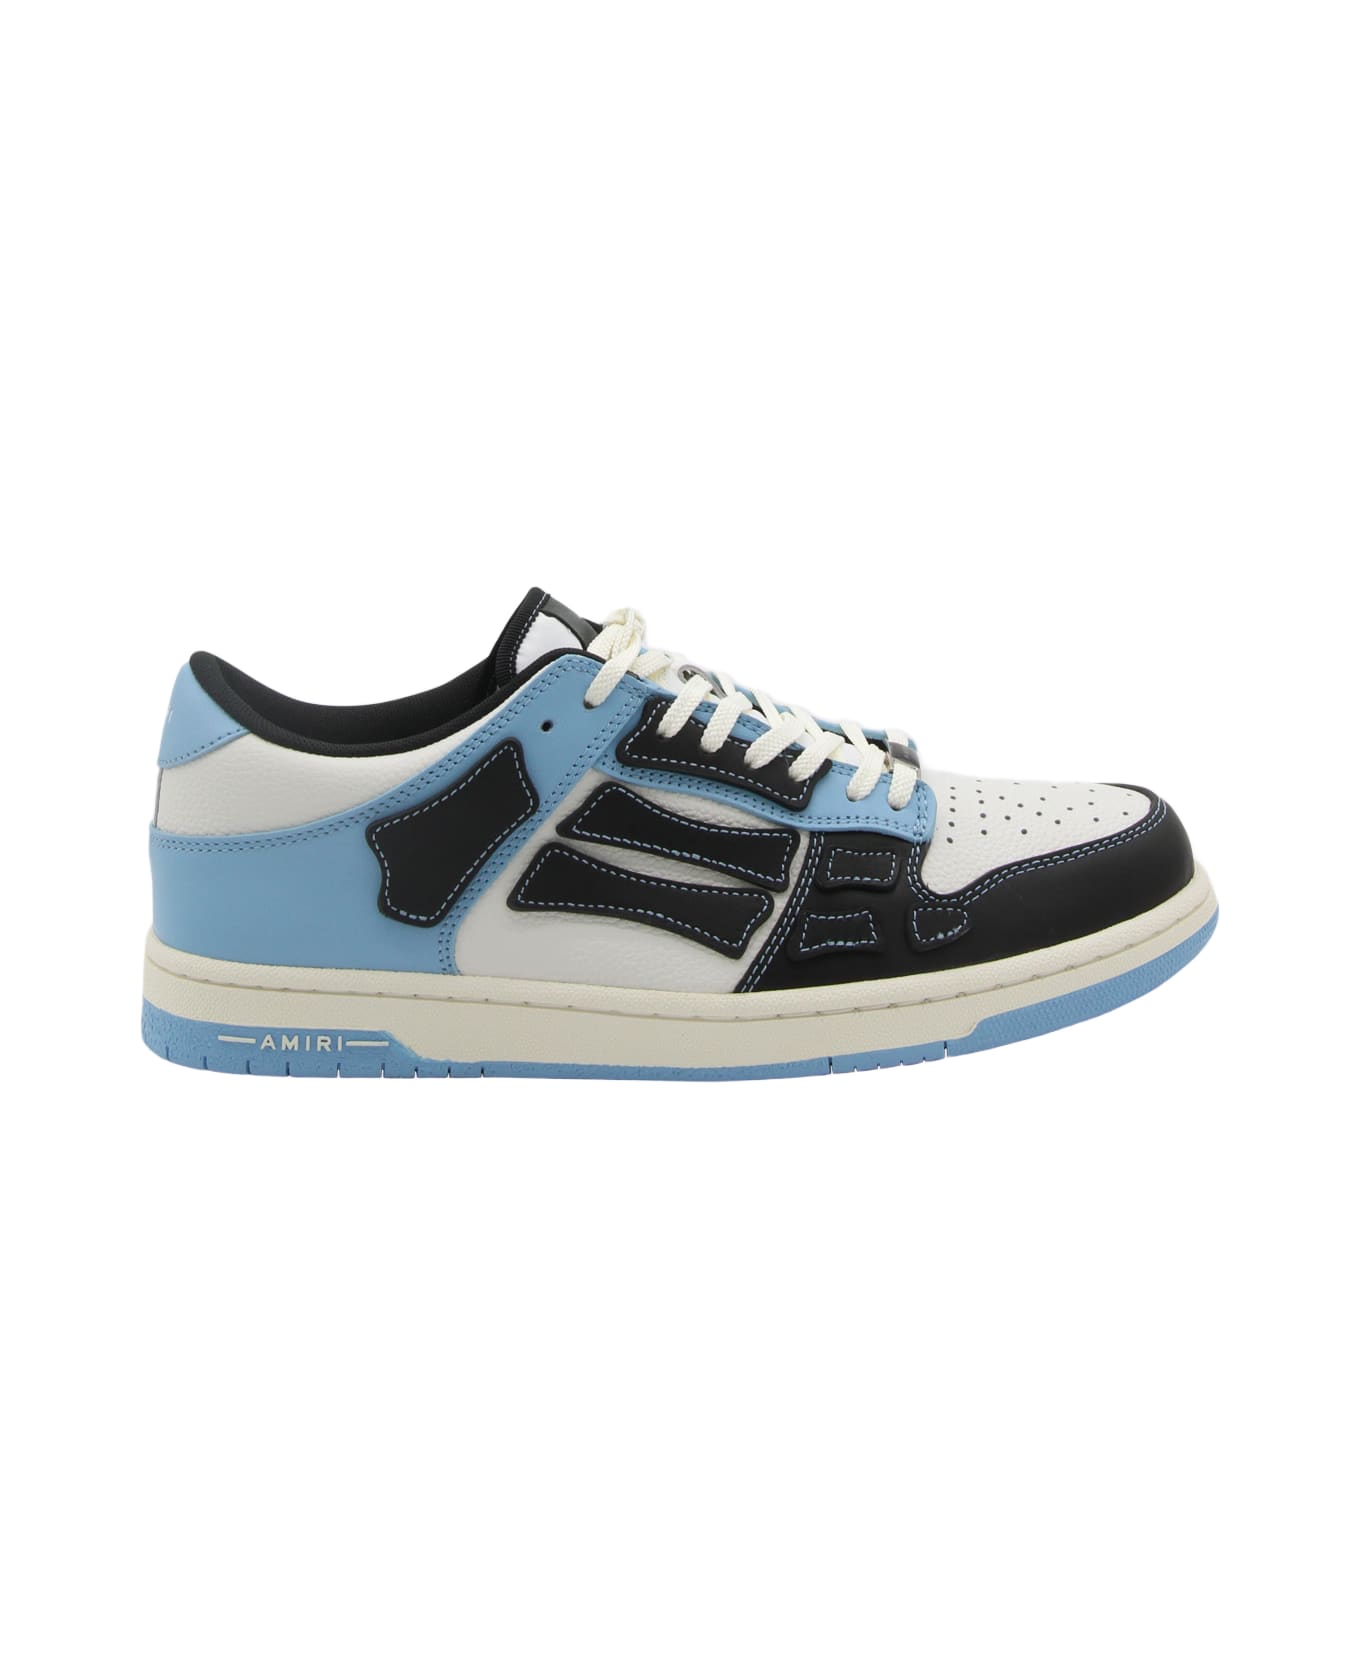 AMIRI Black, White And Light Blue Leather Sneakers - Airblue スニーカー